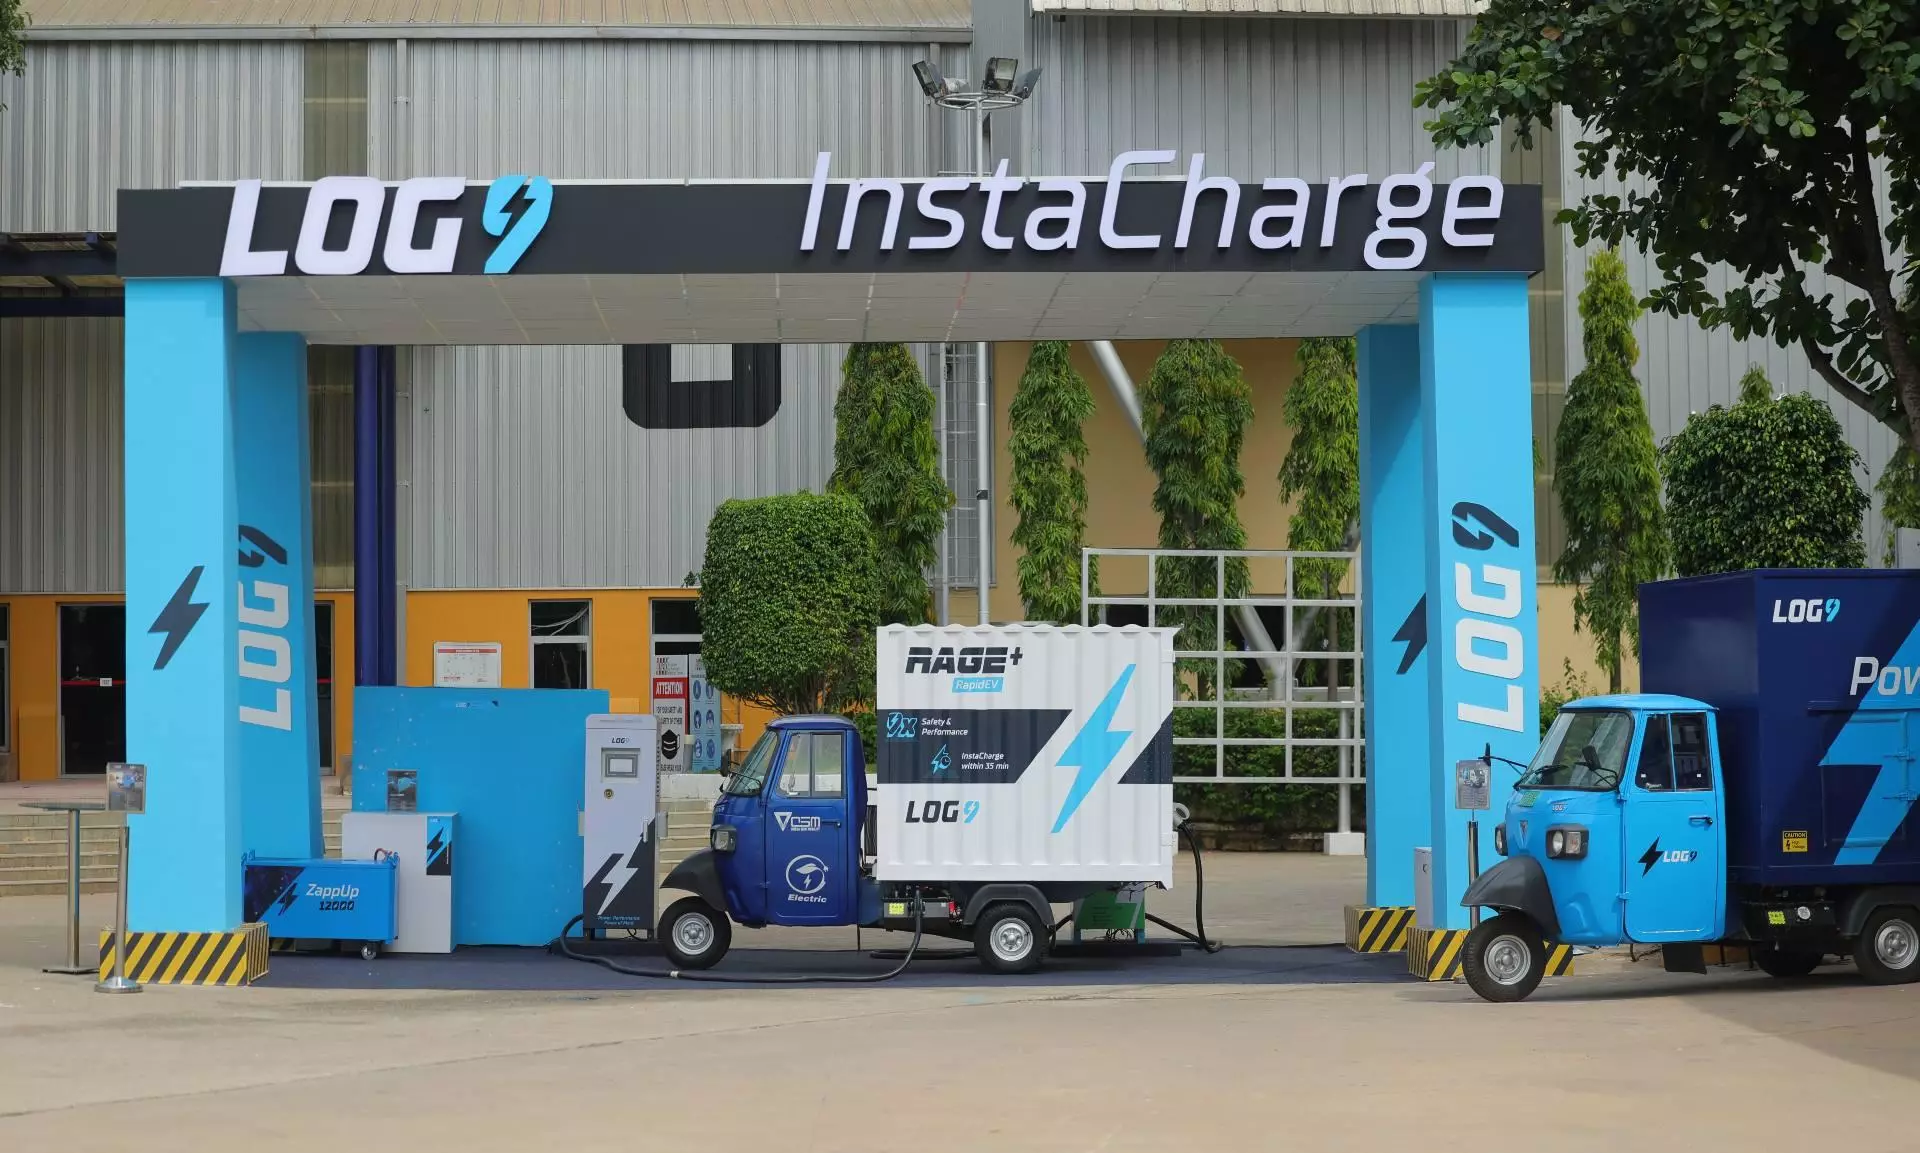 Log9 Mobility, Pulse Energy tie up for EV charging WhatsApp payment